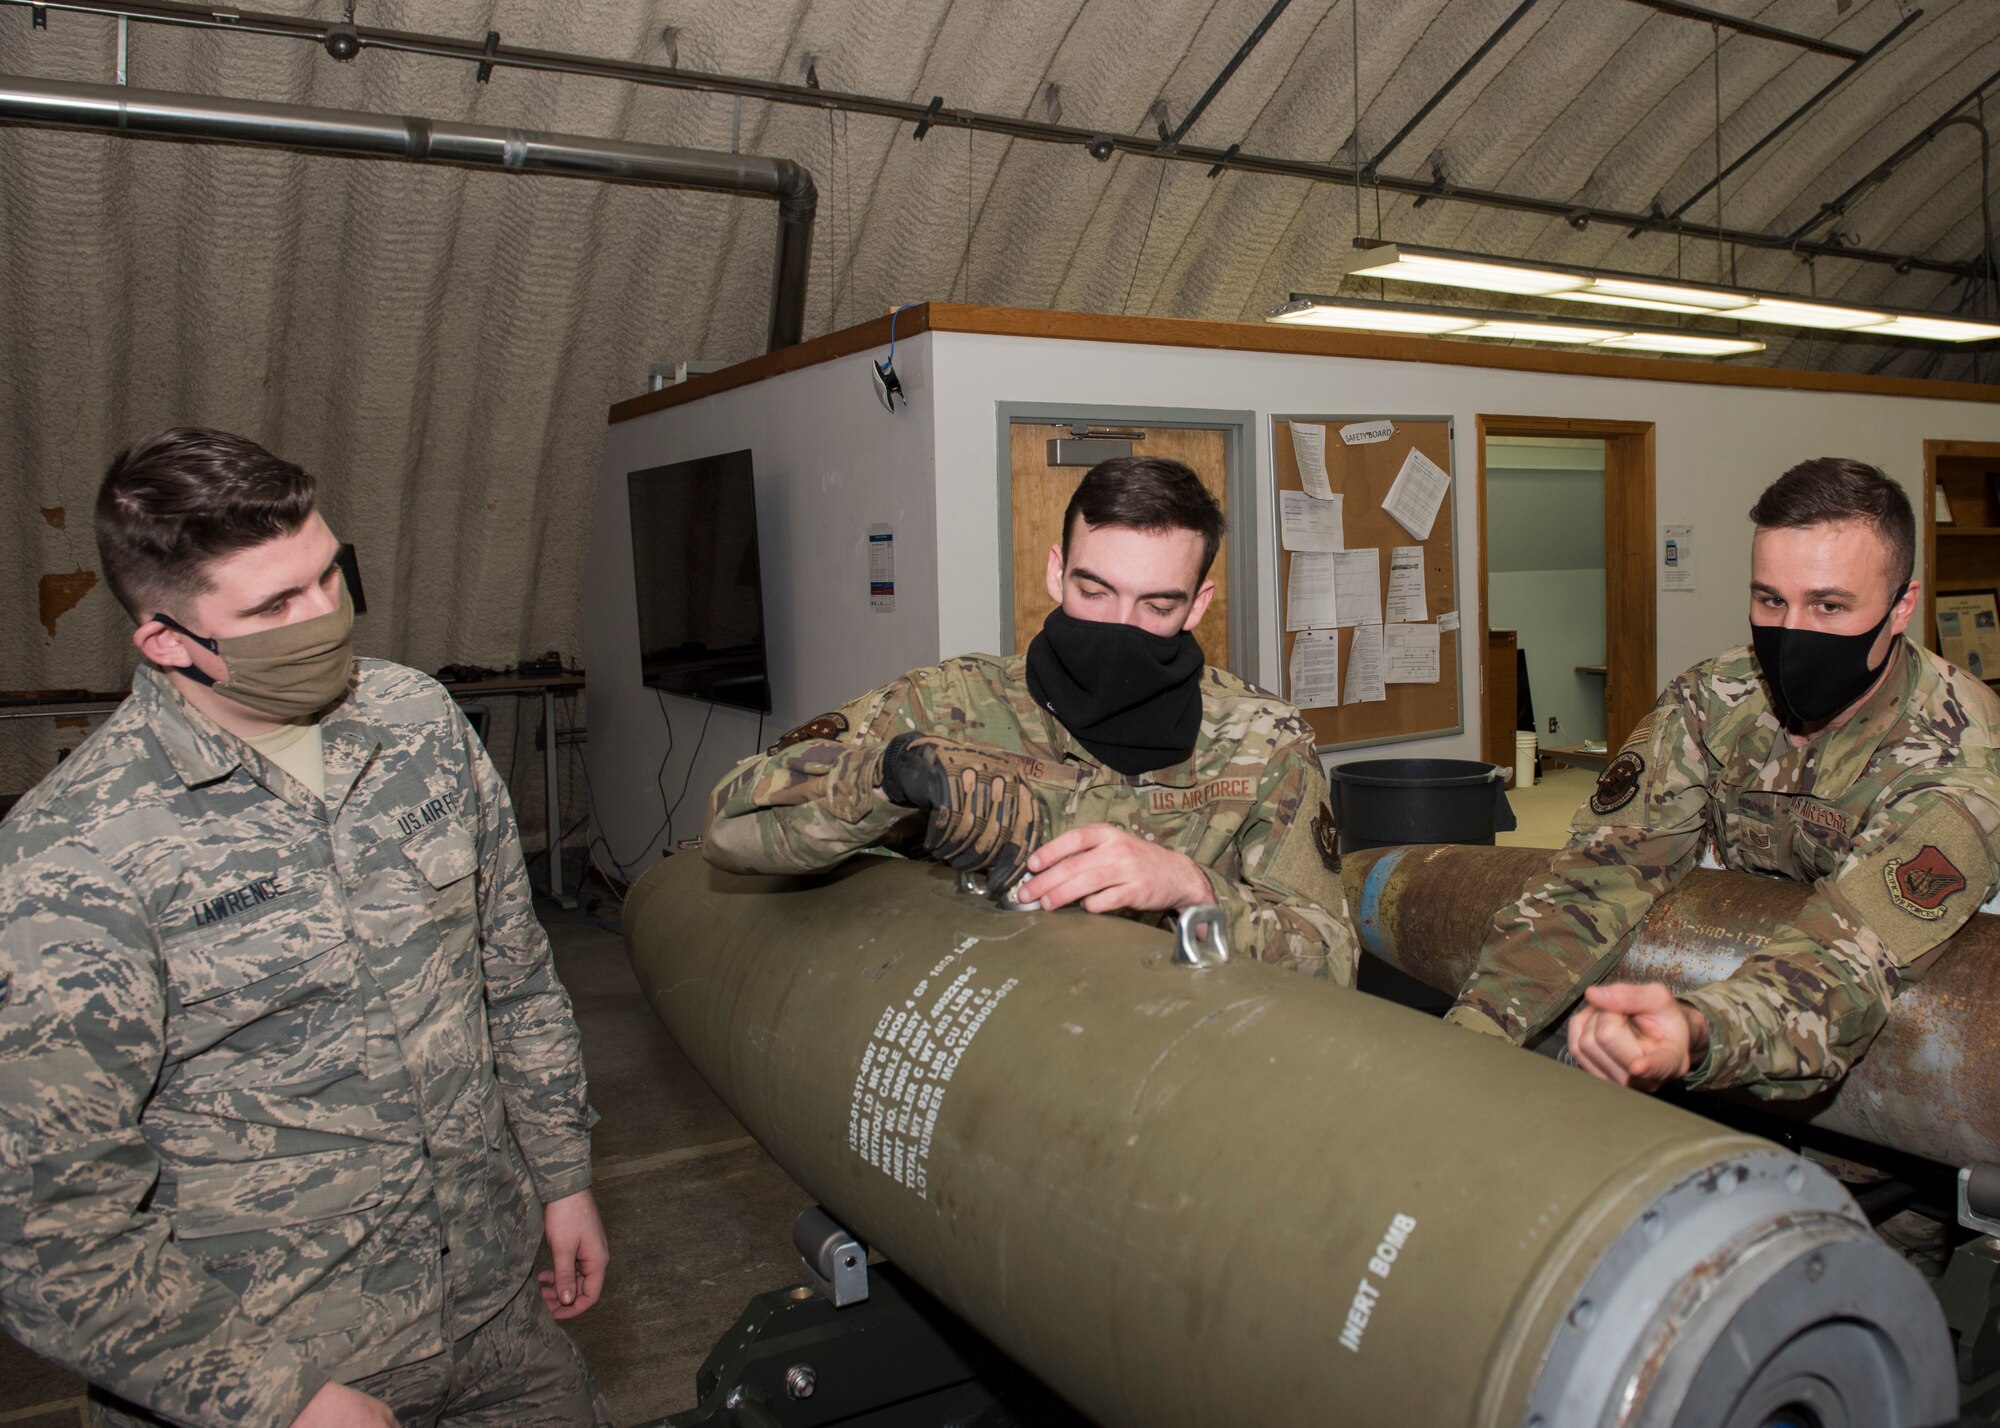 U.S. Air Force Tech. Sgt. Nicholas Kern, right, the 3rd Munitions Squadron training section chief, provides combat munitions training to U.S. Air Force Airman 1st Class Joshua Lawrence, left, a 3rd MUNS stockpile management technician, and U.S. Air Force Airman 1st Class Kyle Krus, a 3rd MUNS conventional maintenance technician, at Joint Base Elmendorf-Richardson, Alaska, Nov. 5, 2020. Kern revamped his squadron’s training section and implemented an expanded CMT program that familiarizes ammo troops with a variety of munitions in one location.